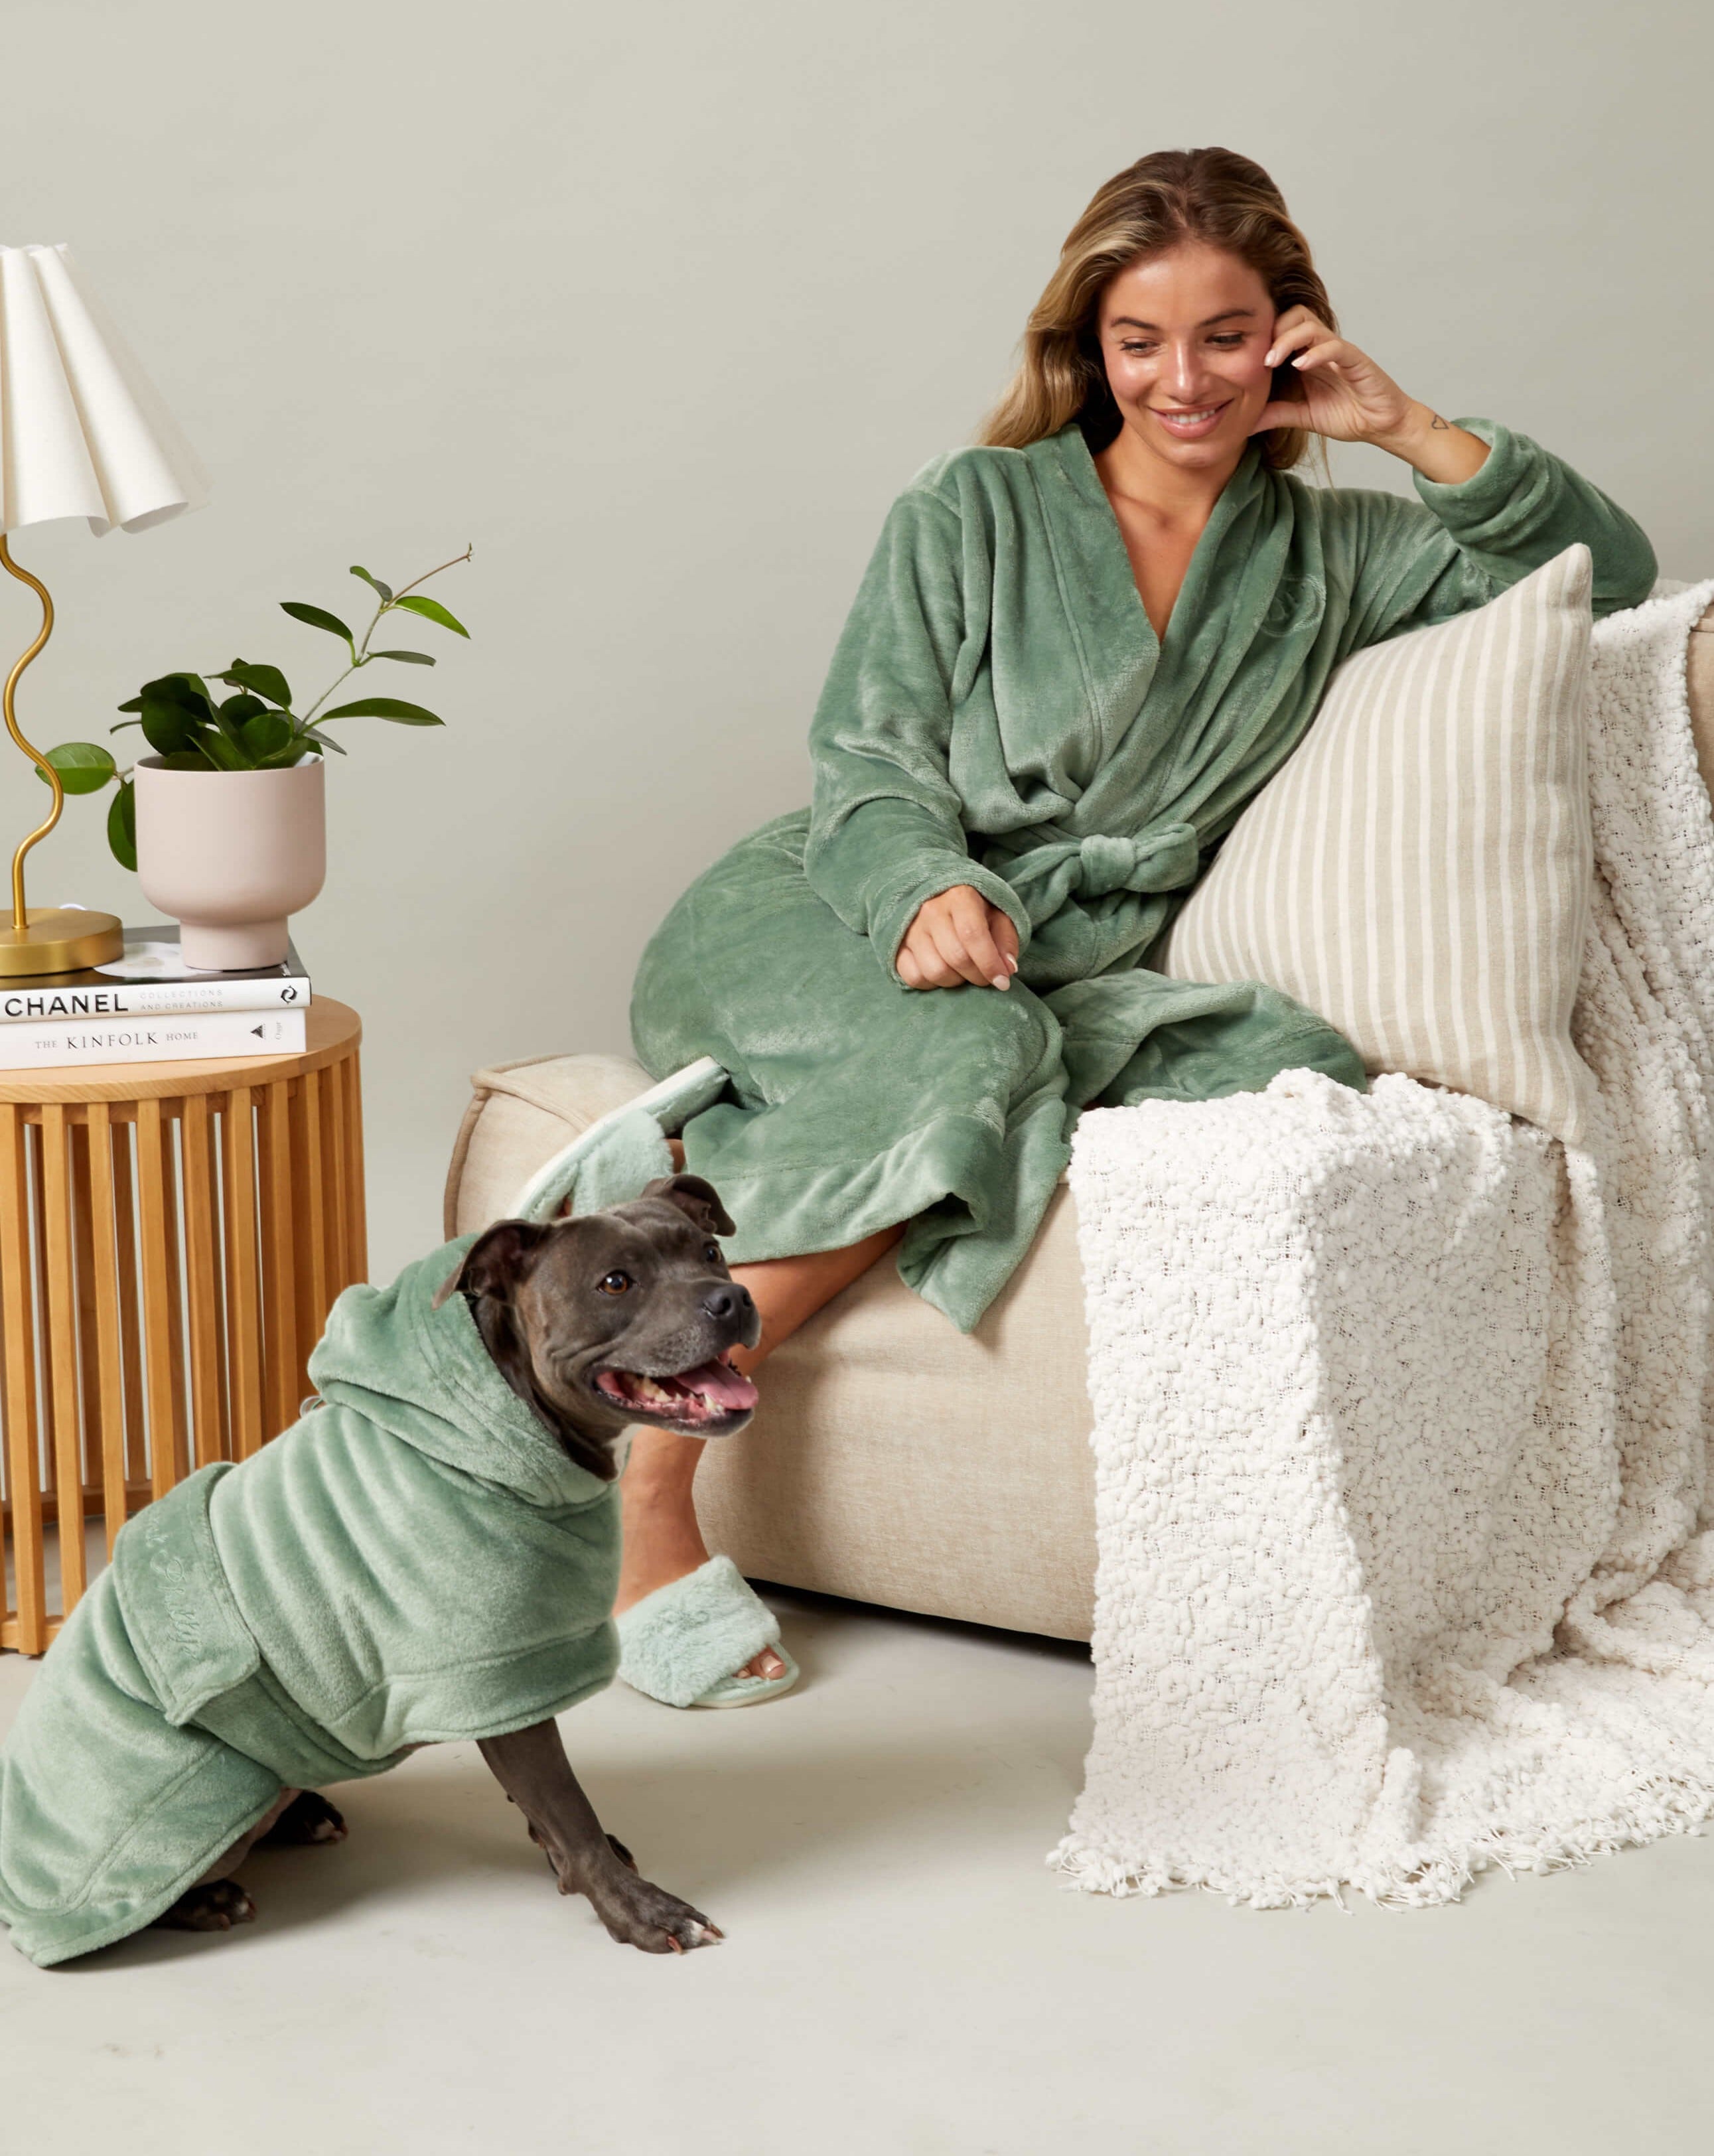 A woman and a dog relaxing at home wearing matching human and dog fluffy robes.